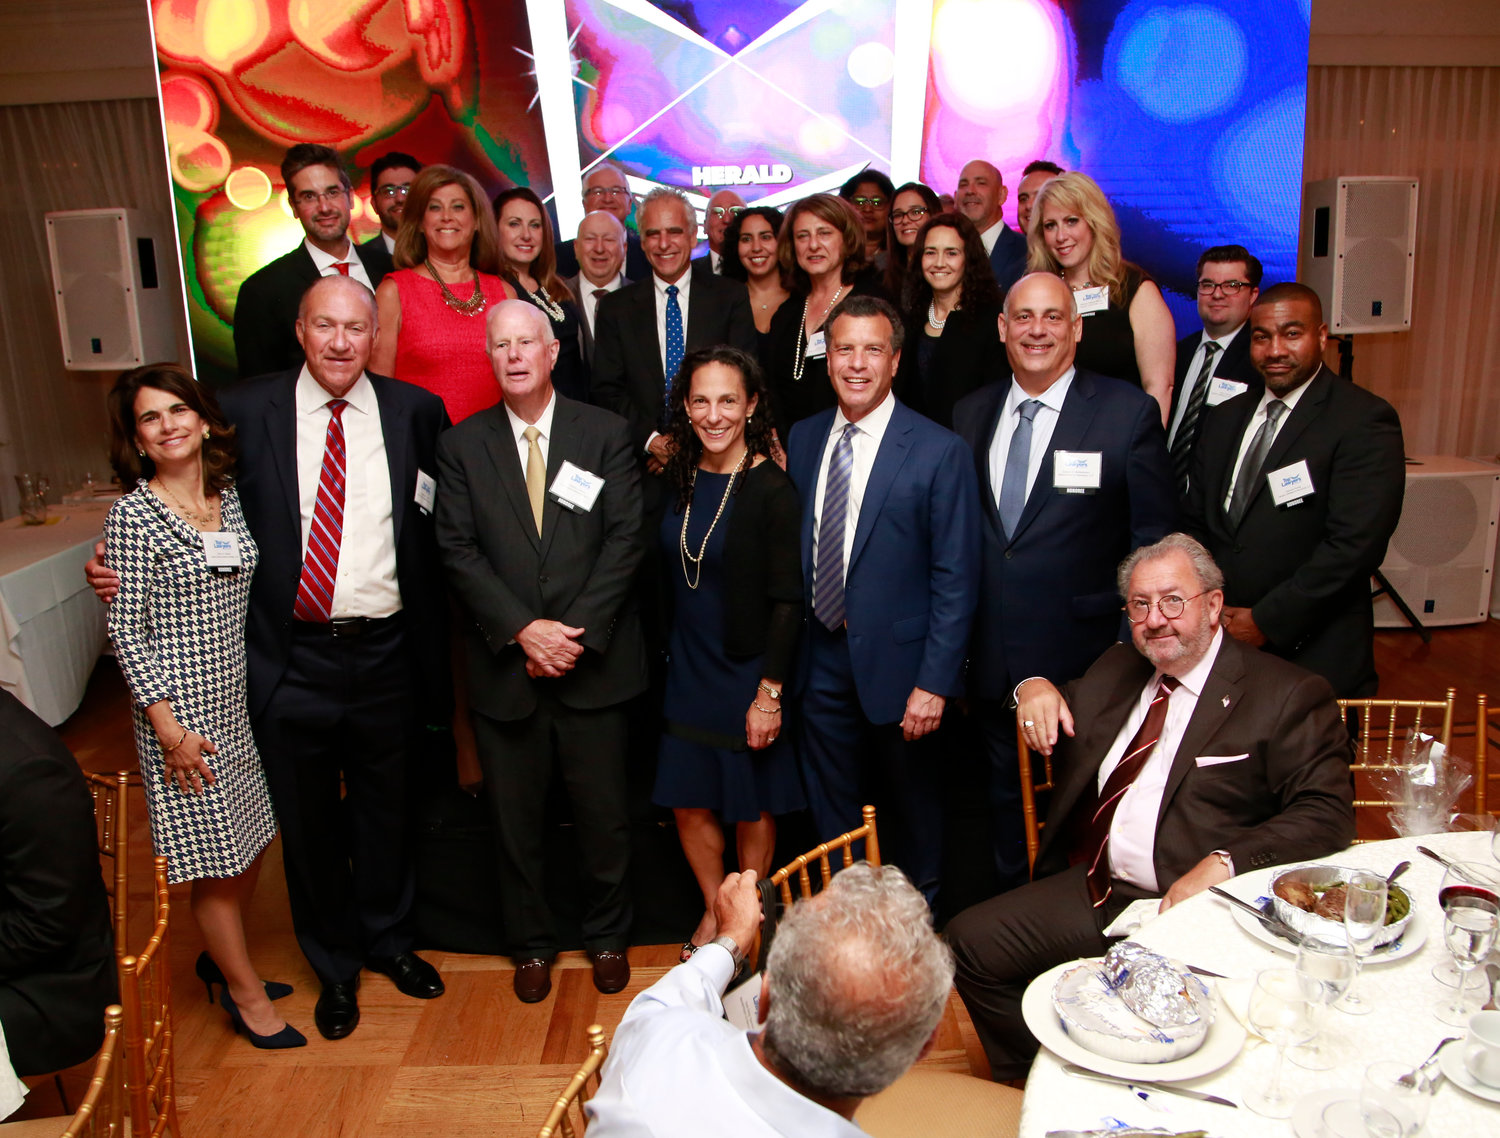 The Top Lawyers of Long Island Awards Gala, hosted by RichnerLIVE and Herald Community Newspapers, recognized nearly 50 of the highest-performing legal professionals at the Carltun in Eisenhower Park on Sept. 25.